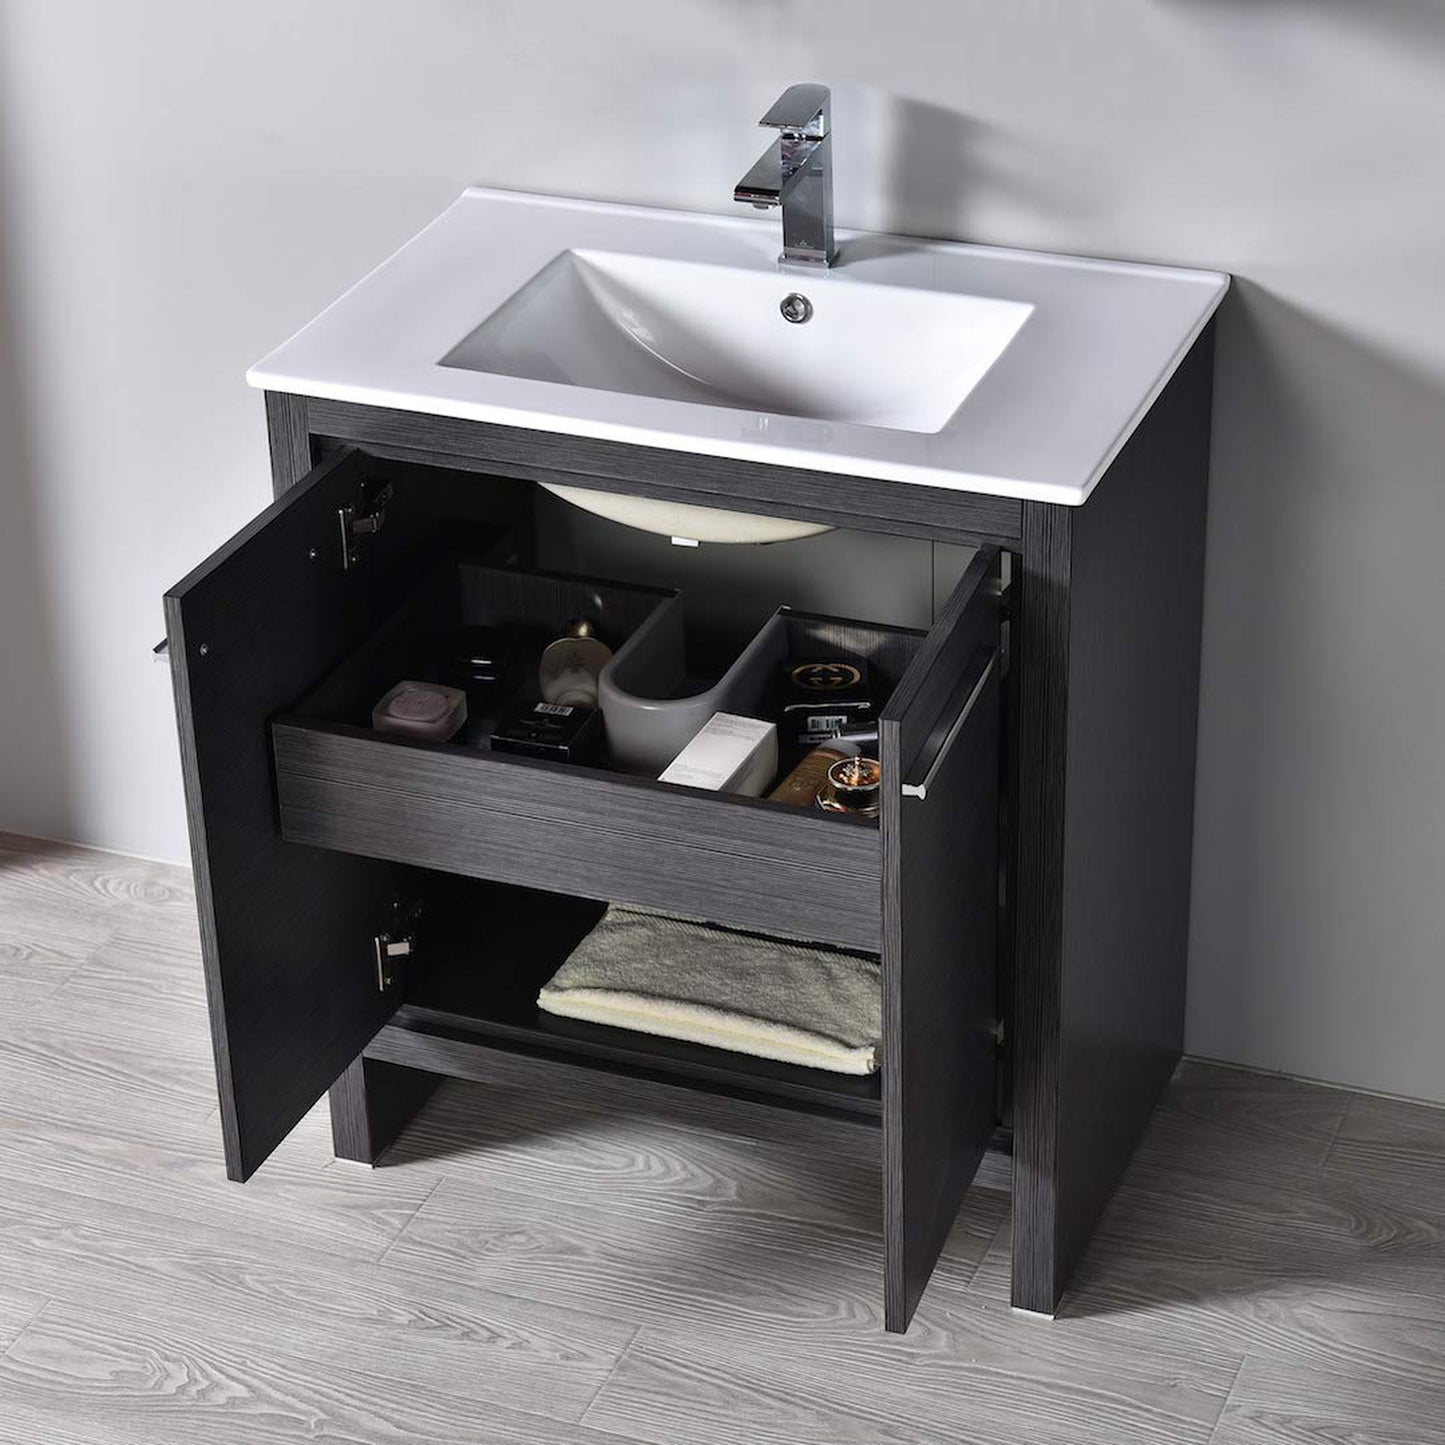 Blossom Milan 30" 2-Door 1-Drawer Silver Gray Freestanding Vanity With Ceramic Drop-In Single Sink And Mirror